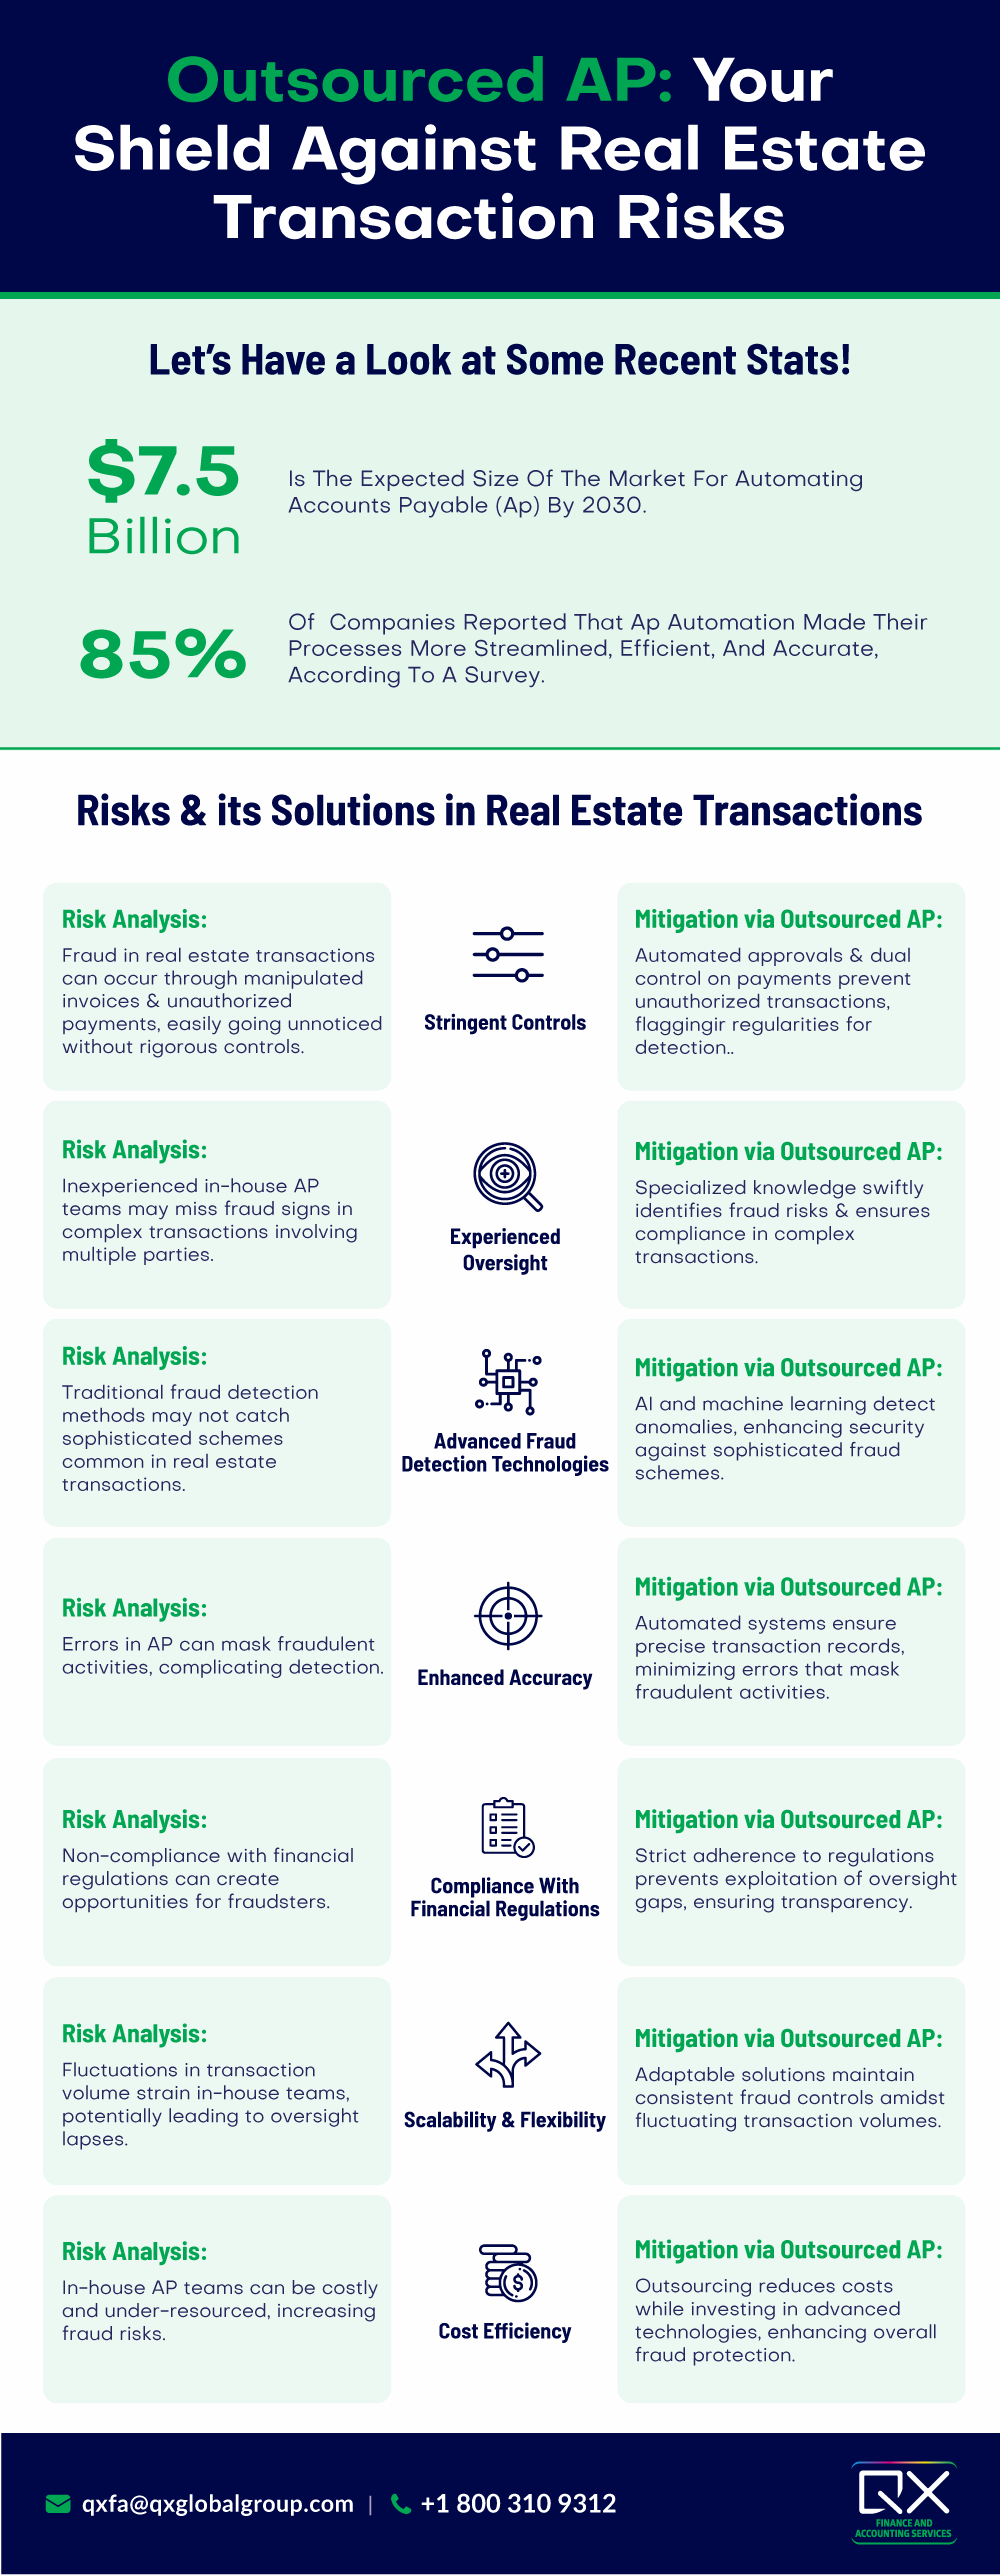 Outsourced AP: Your Shield Against Real Estate Transaction Risks 